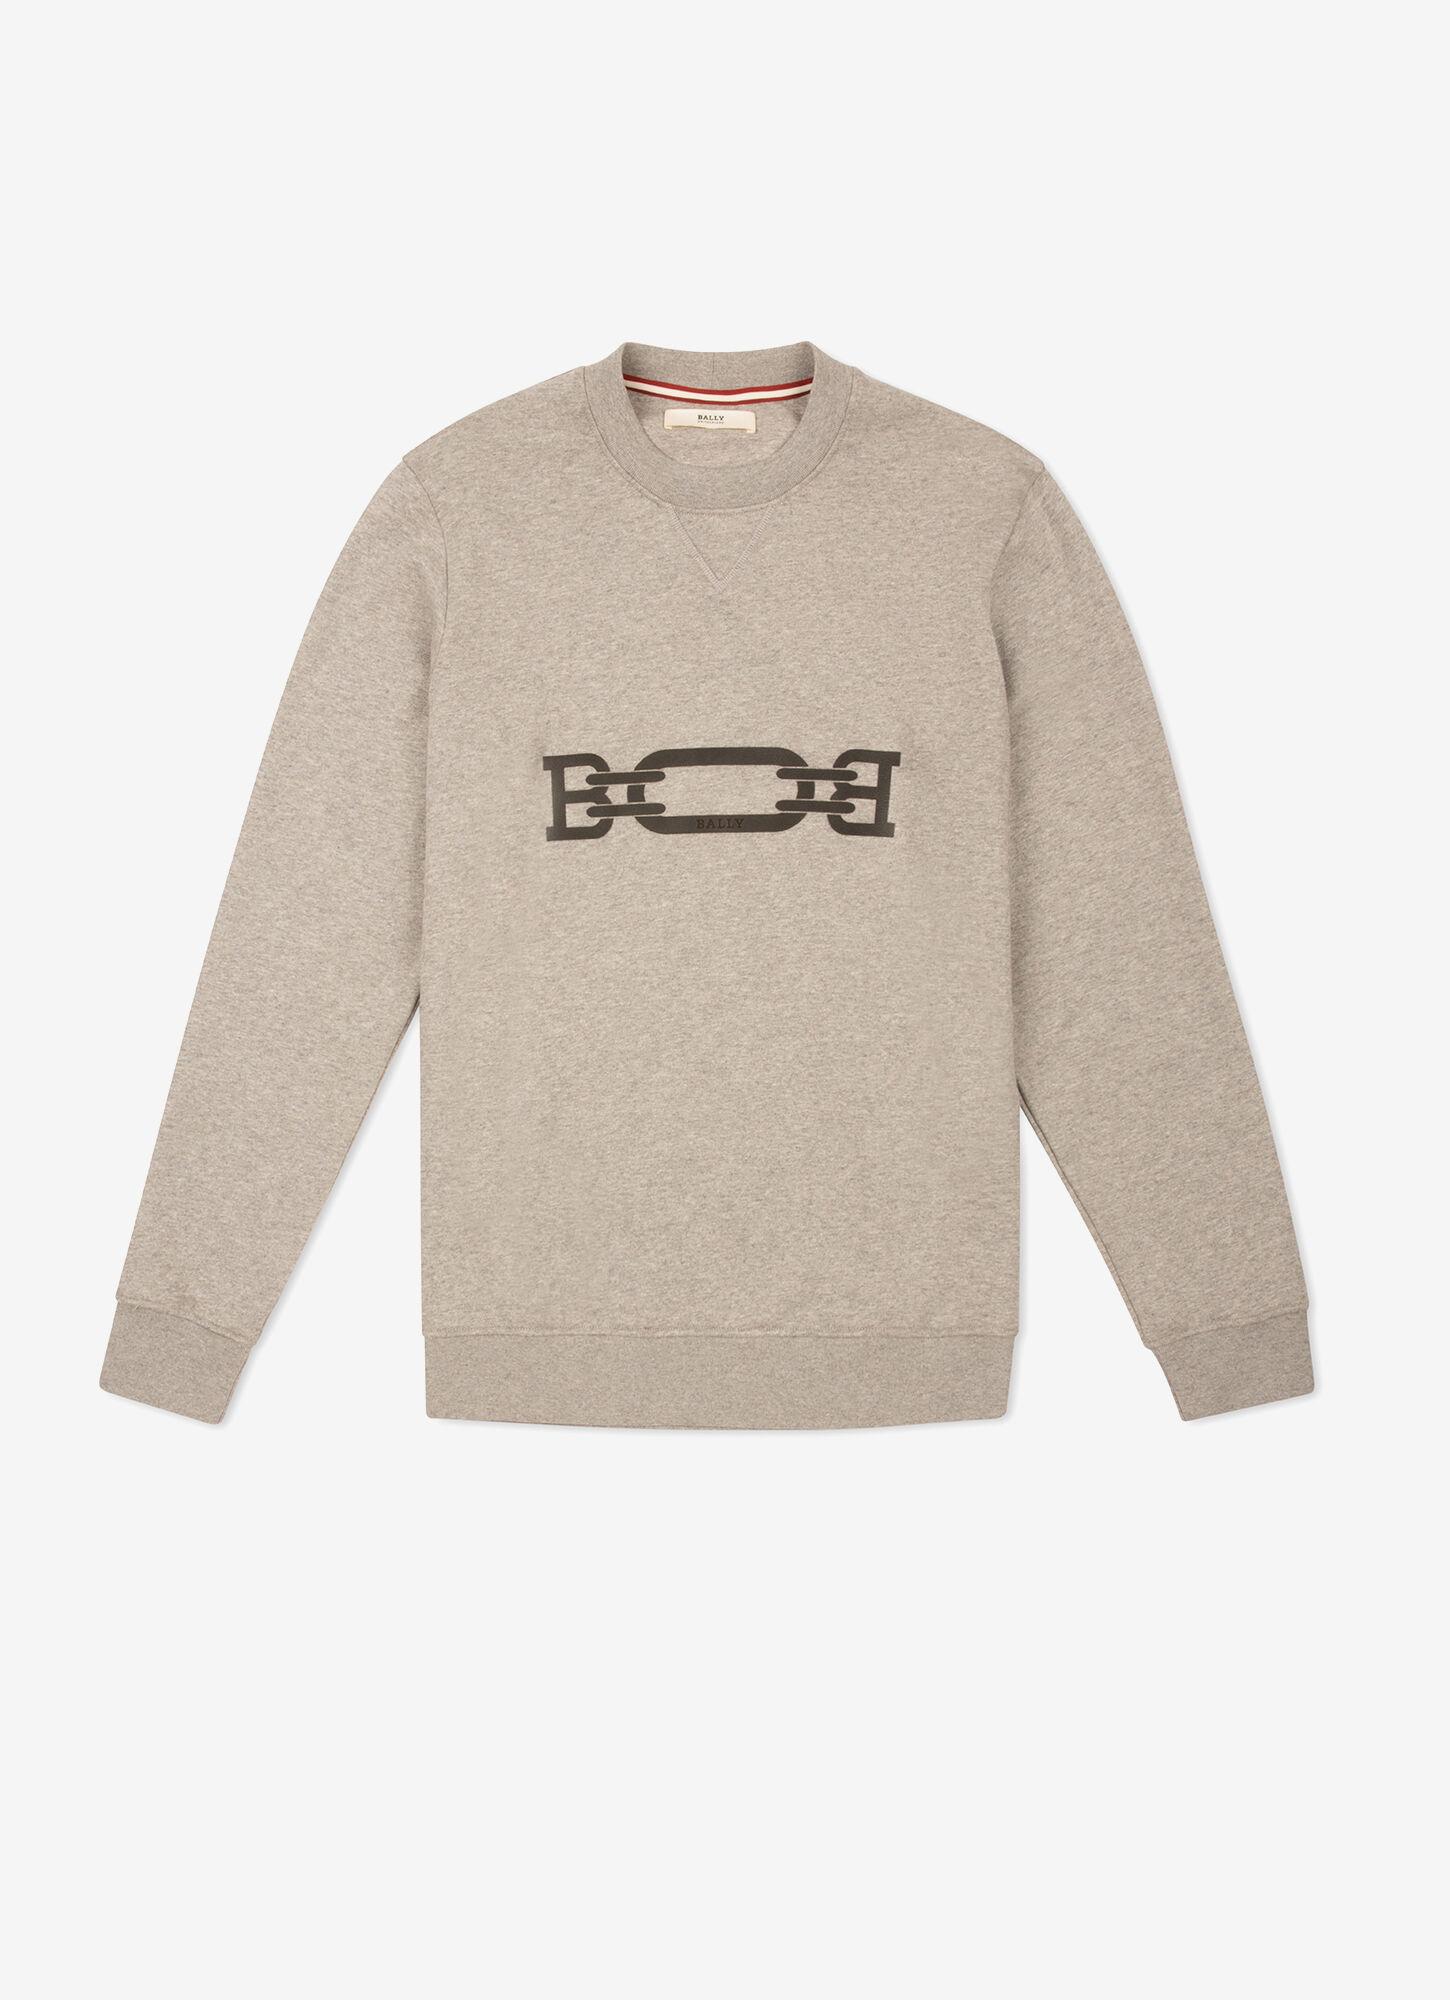 Bally Cotton 1851 Sweater in Grey (Gray) for Men - Lyst